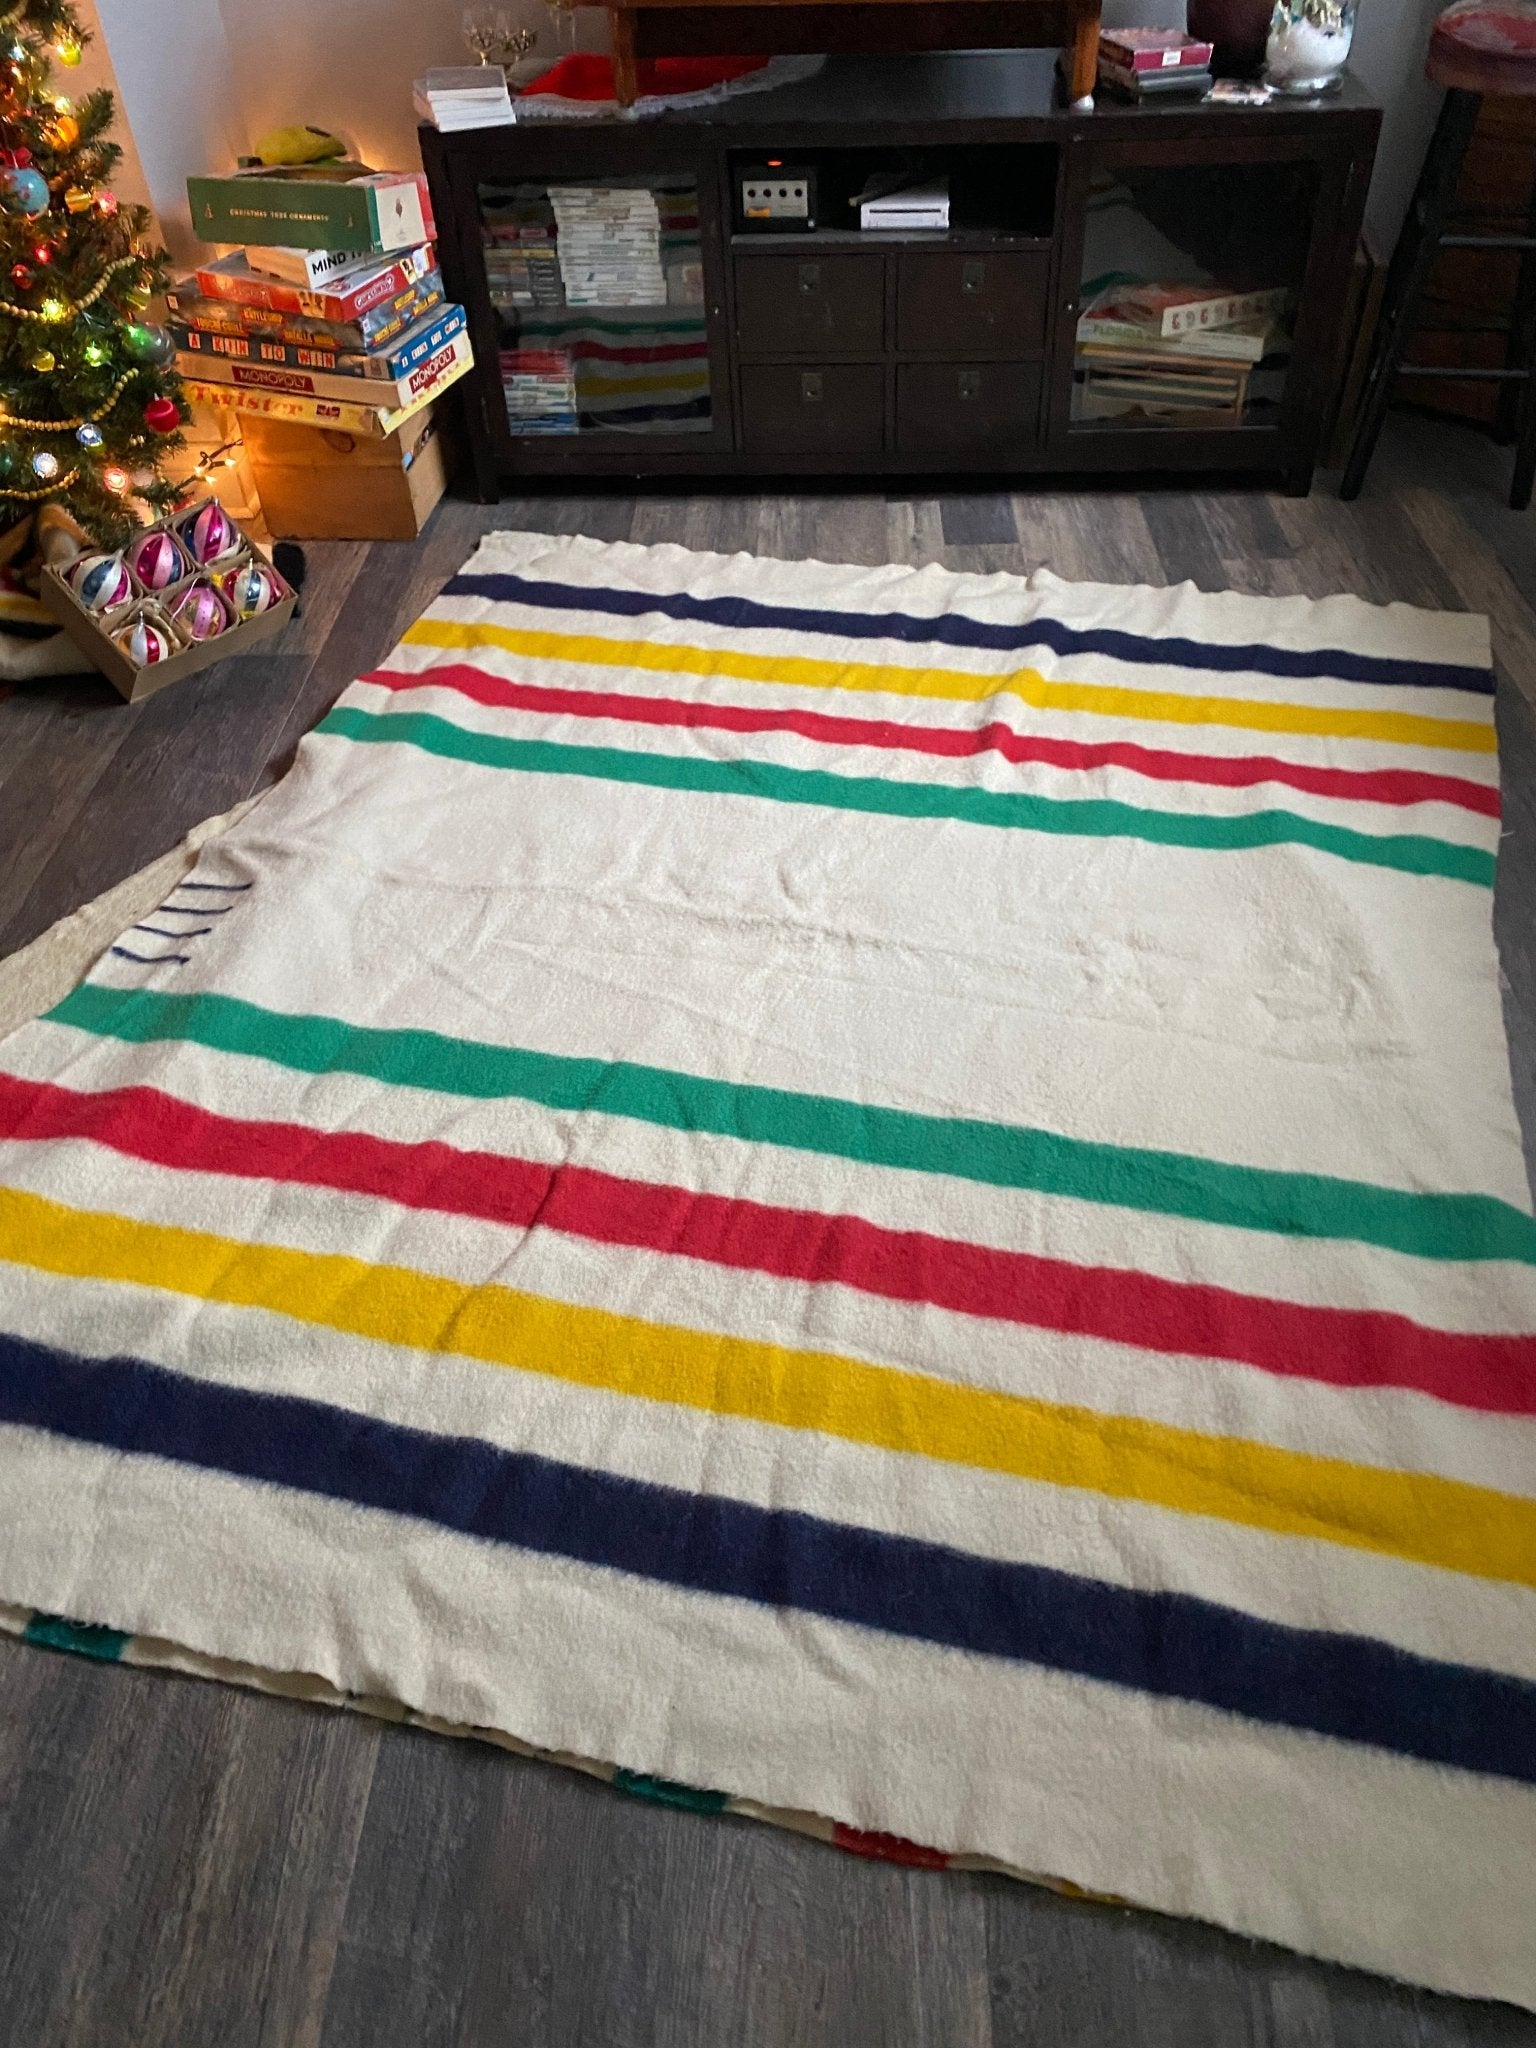 Vintage Hudson Bay Company Point Blanket - Made in England - Perth Market